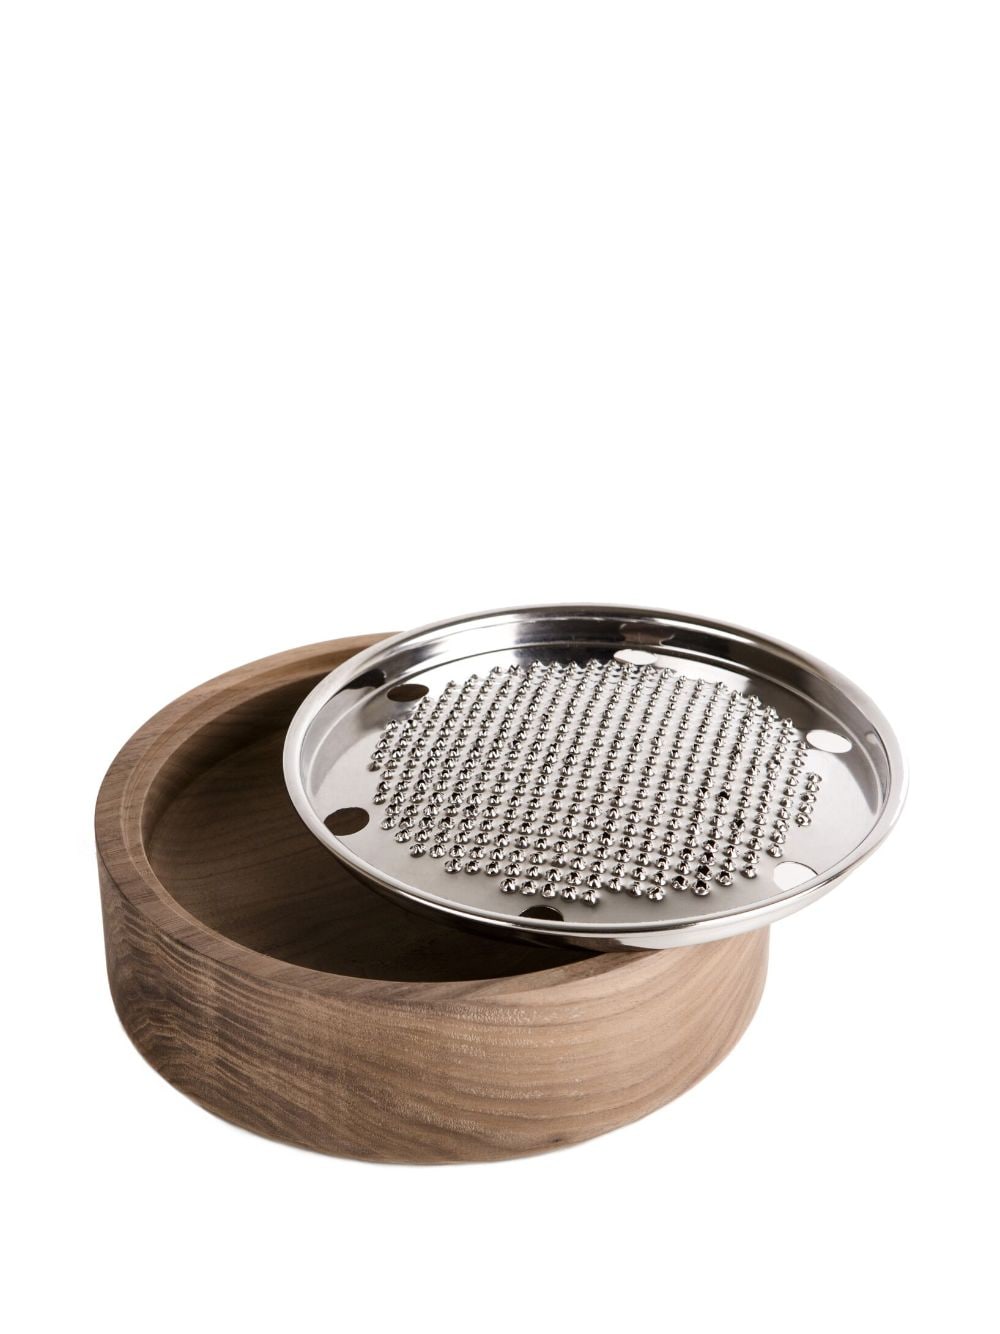 Shop Knindustrie Bari Cheese Grater In Brown